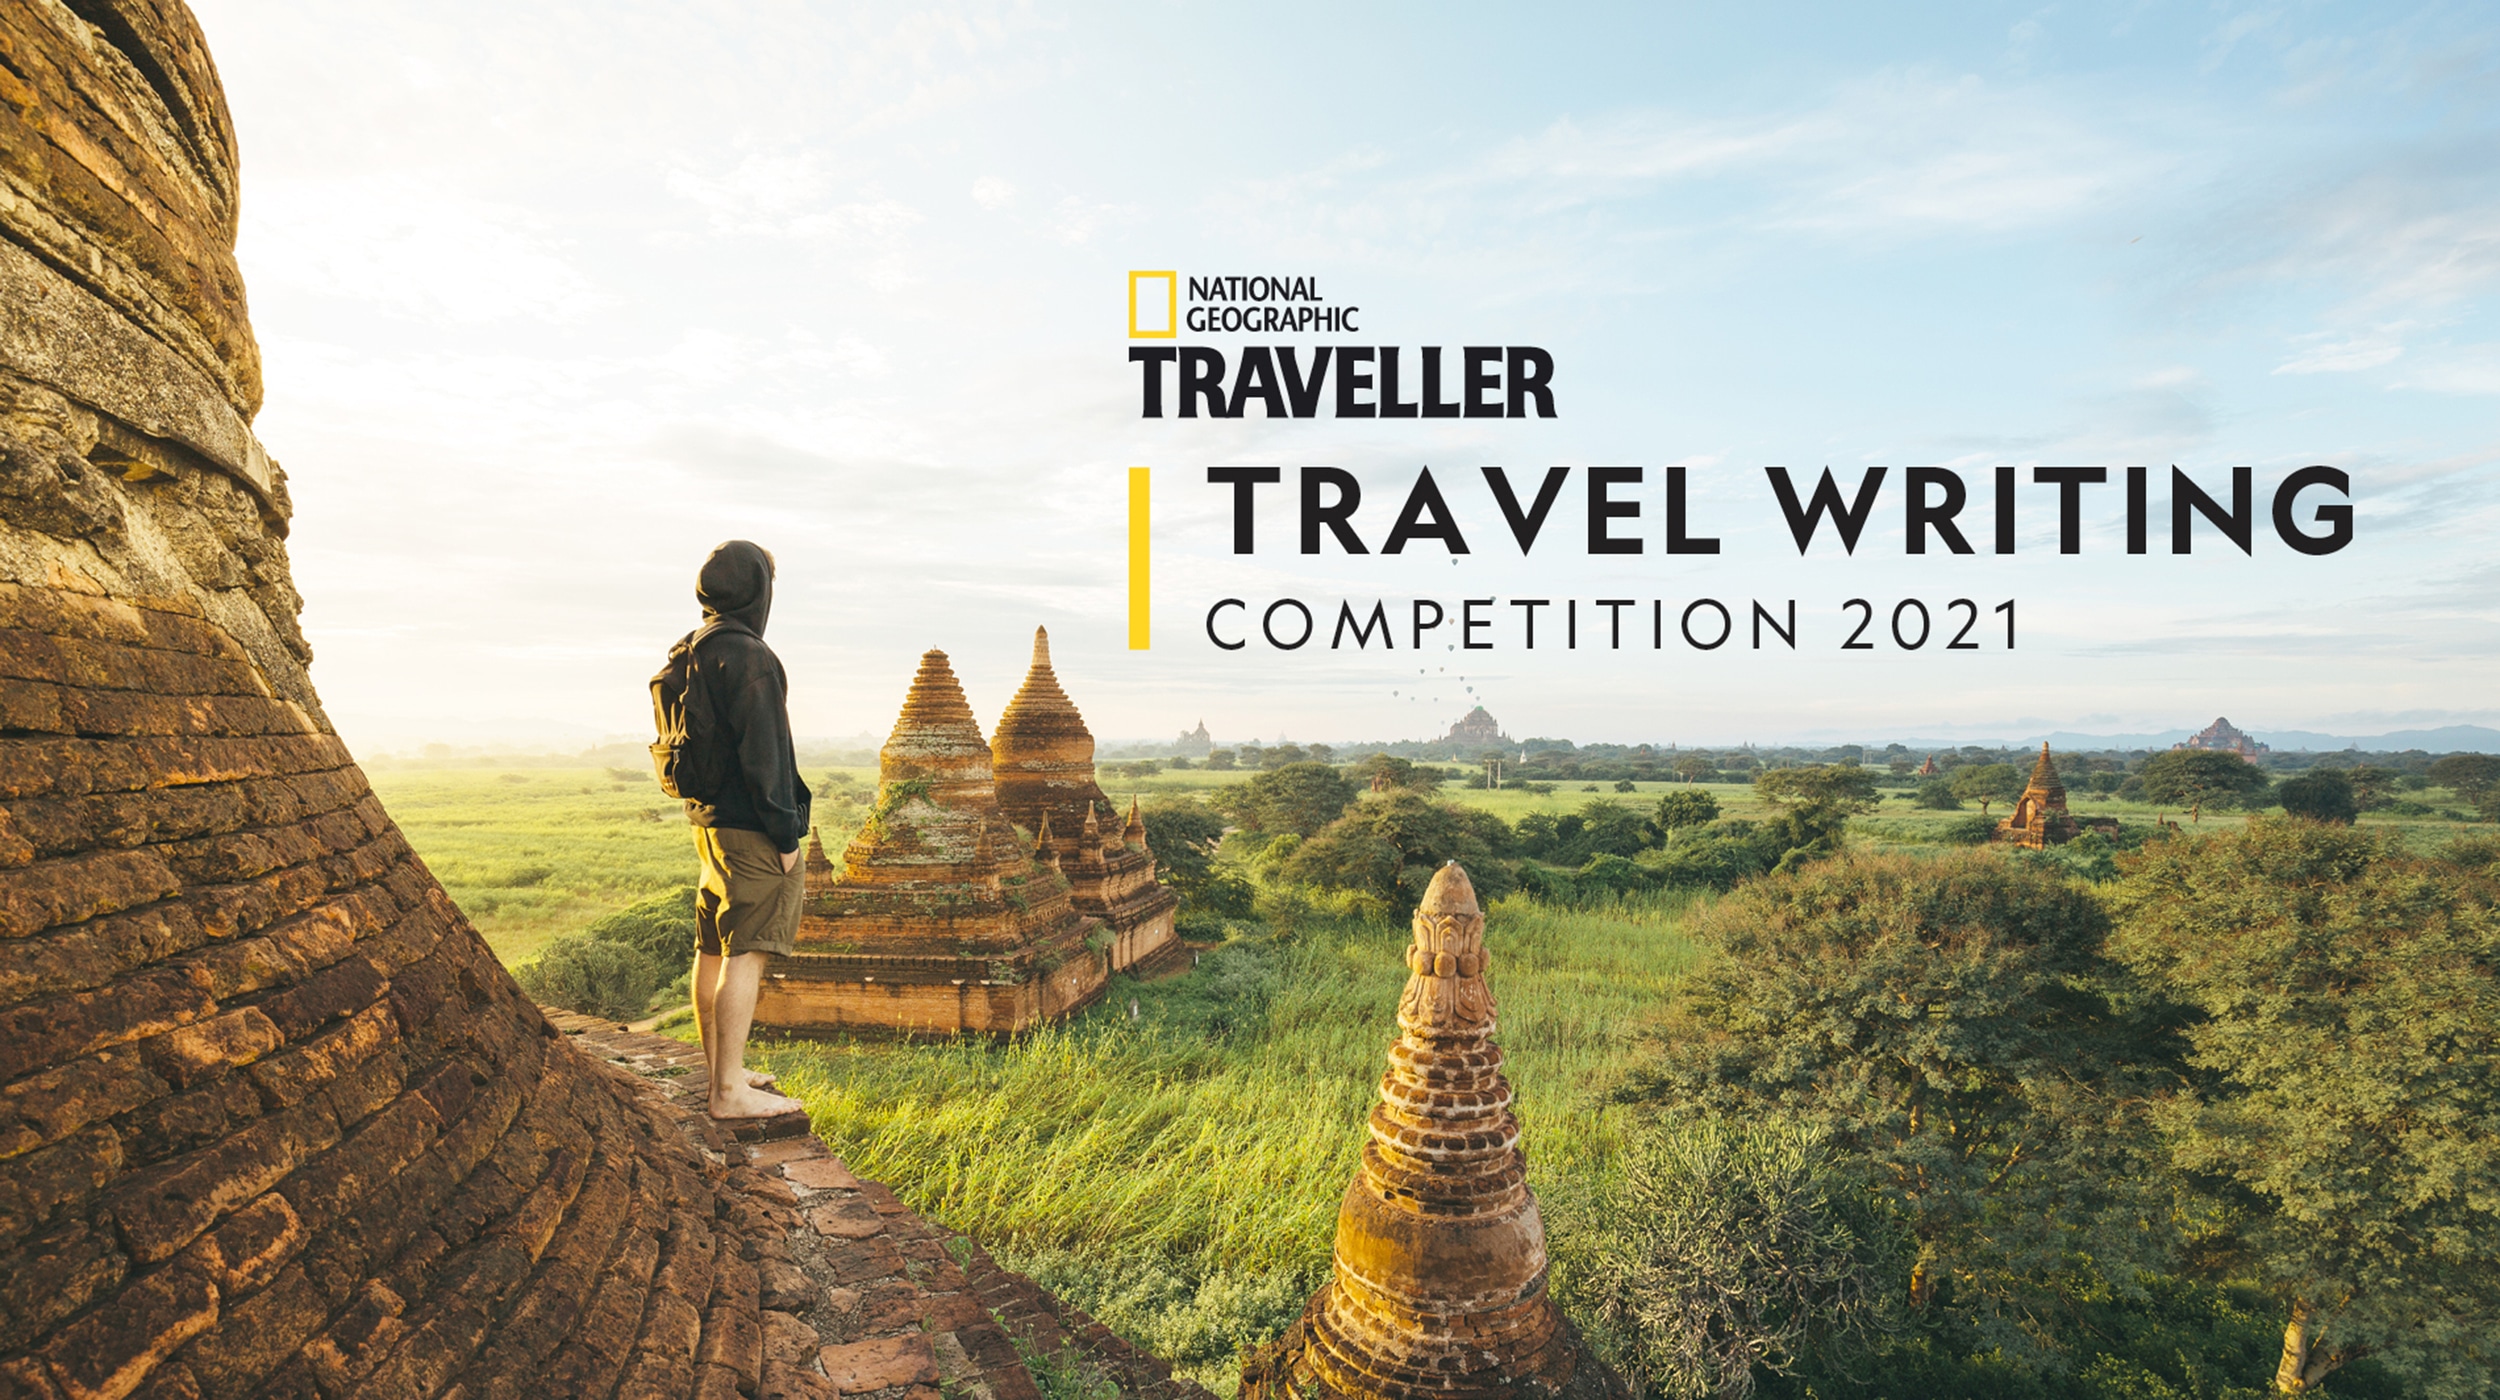 The National Geographic Traveller (UK) Travel Writing Competition 2021.